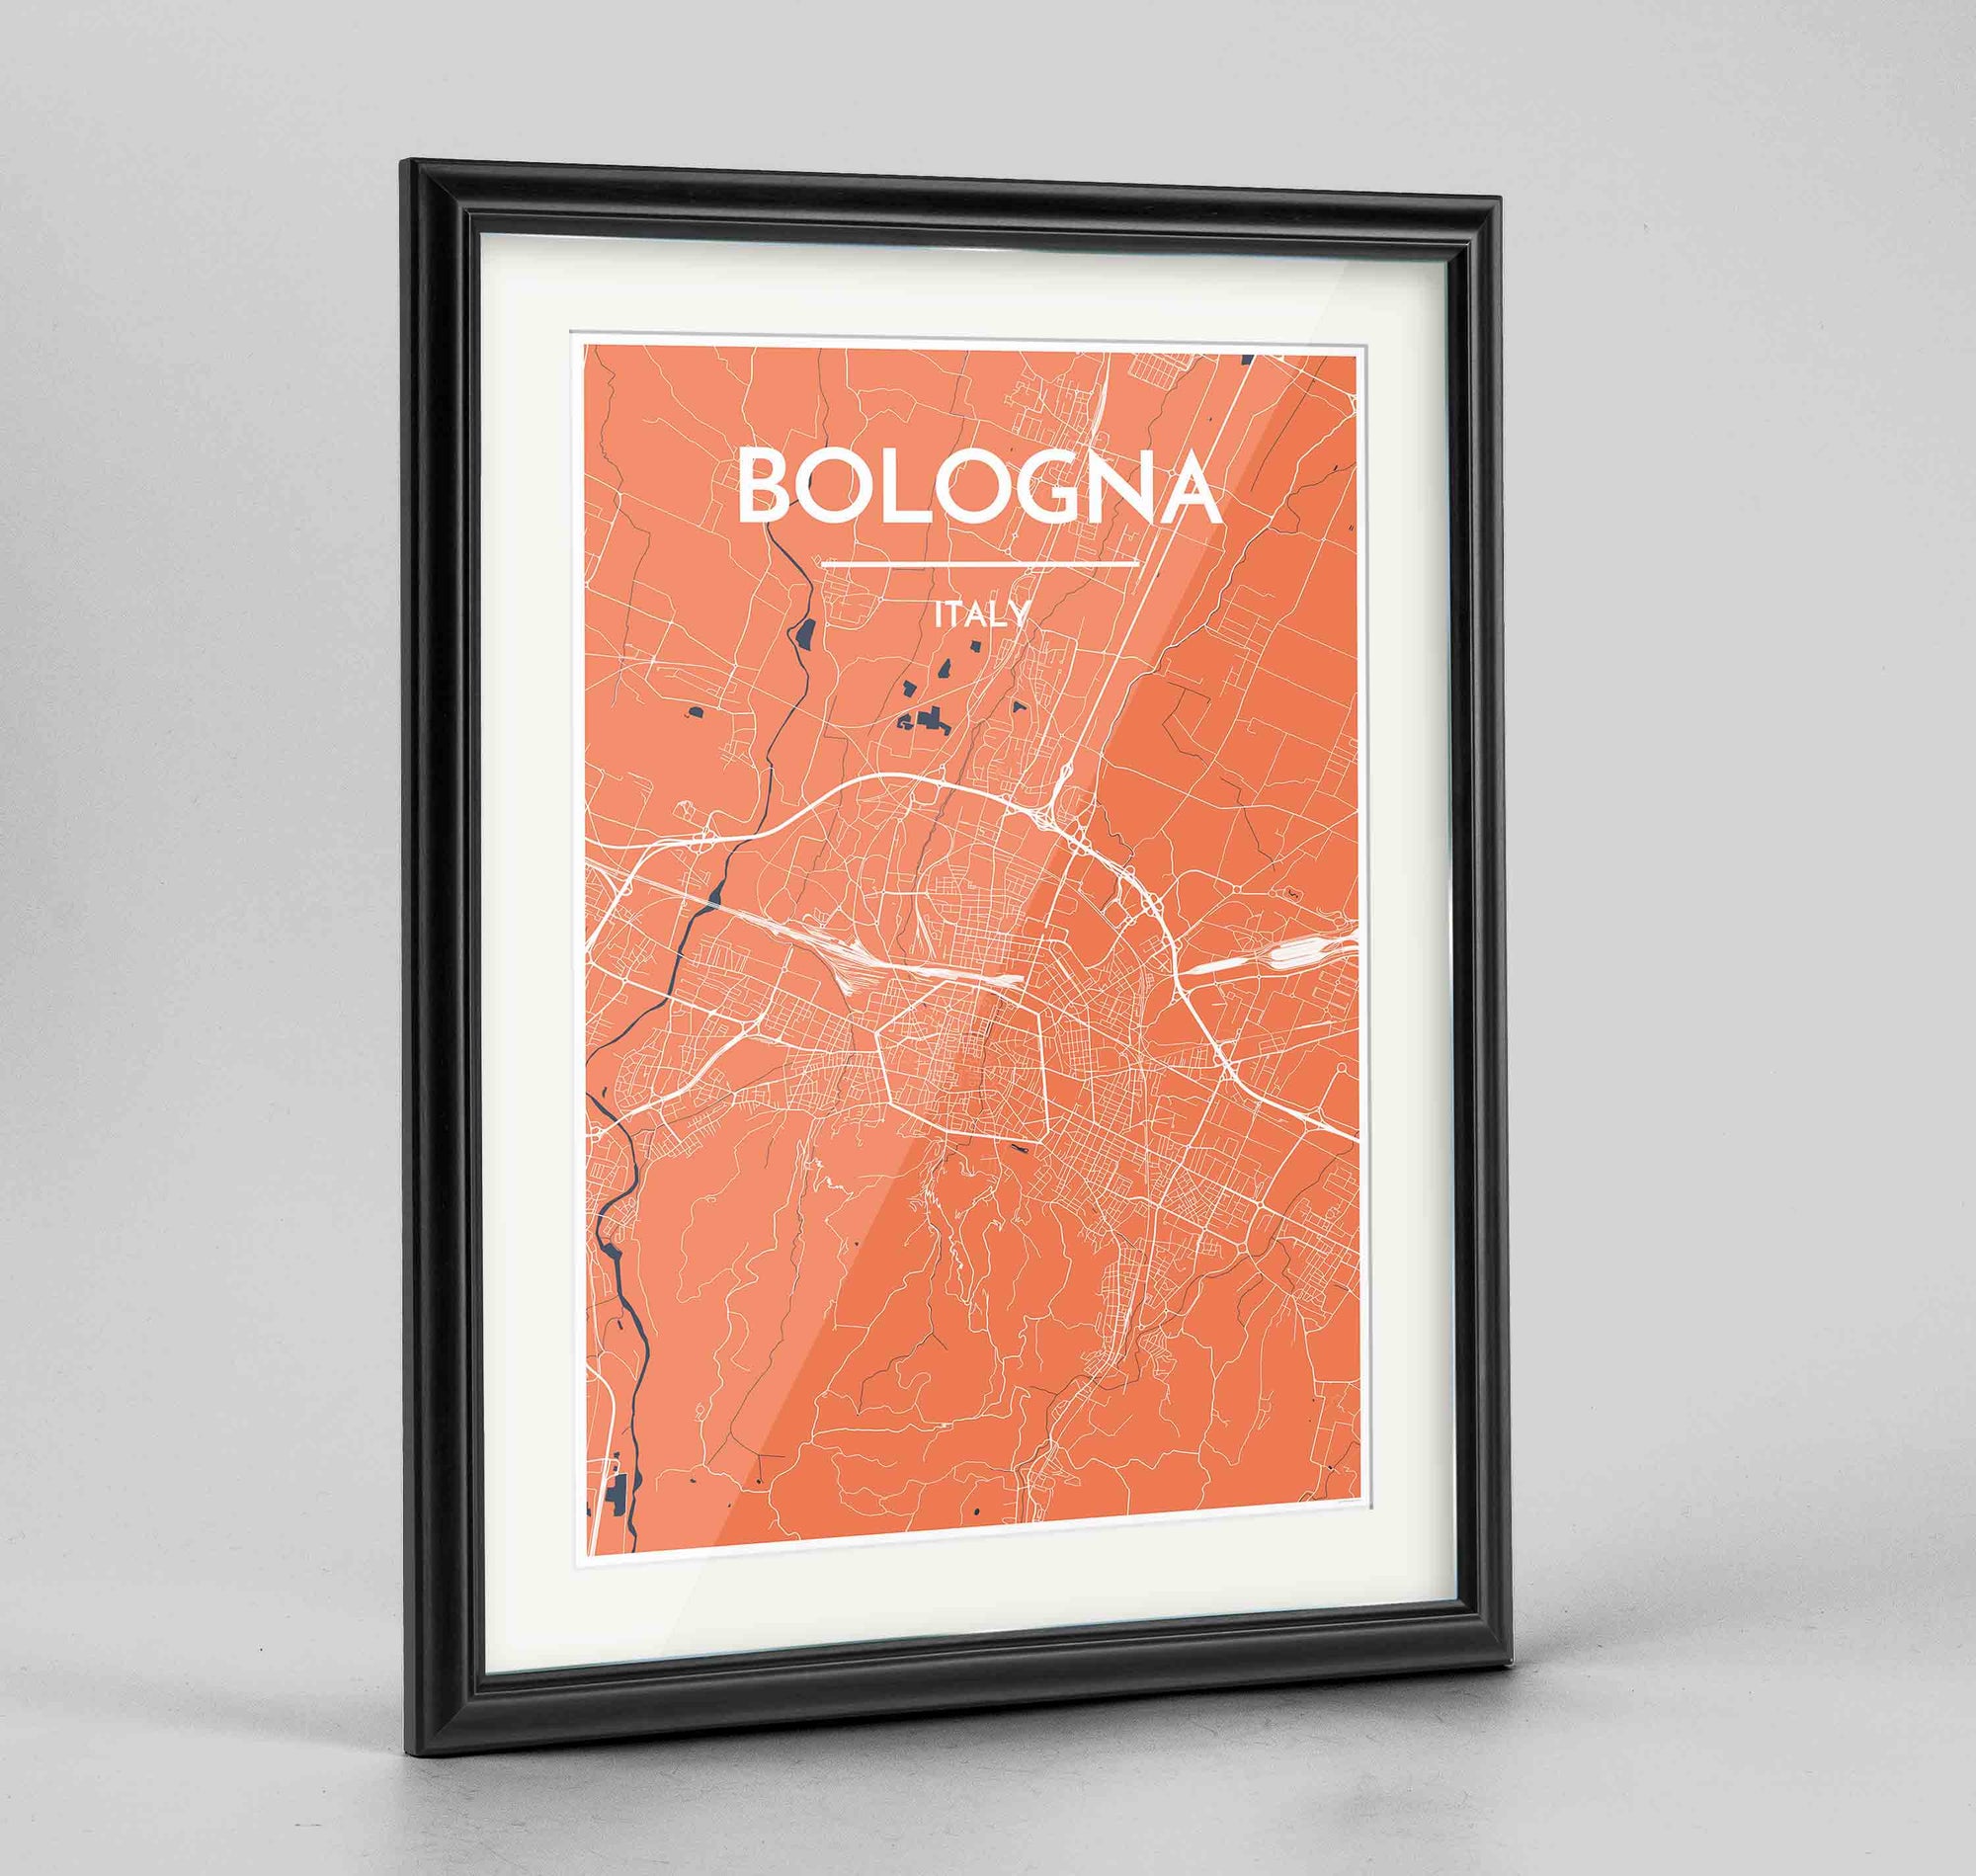 Framed Bologna City Map 24x36" Traditional Black frame Point Two Design Group